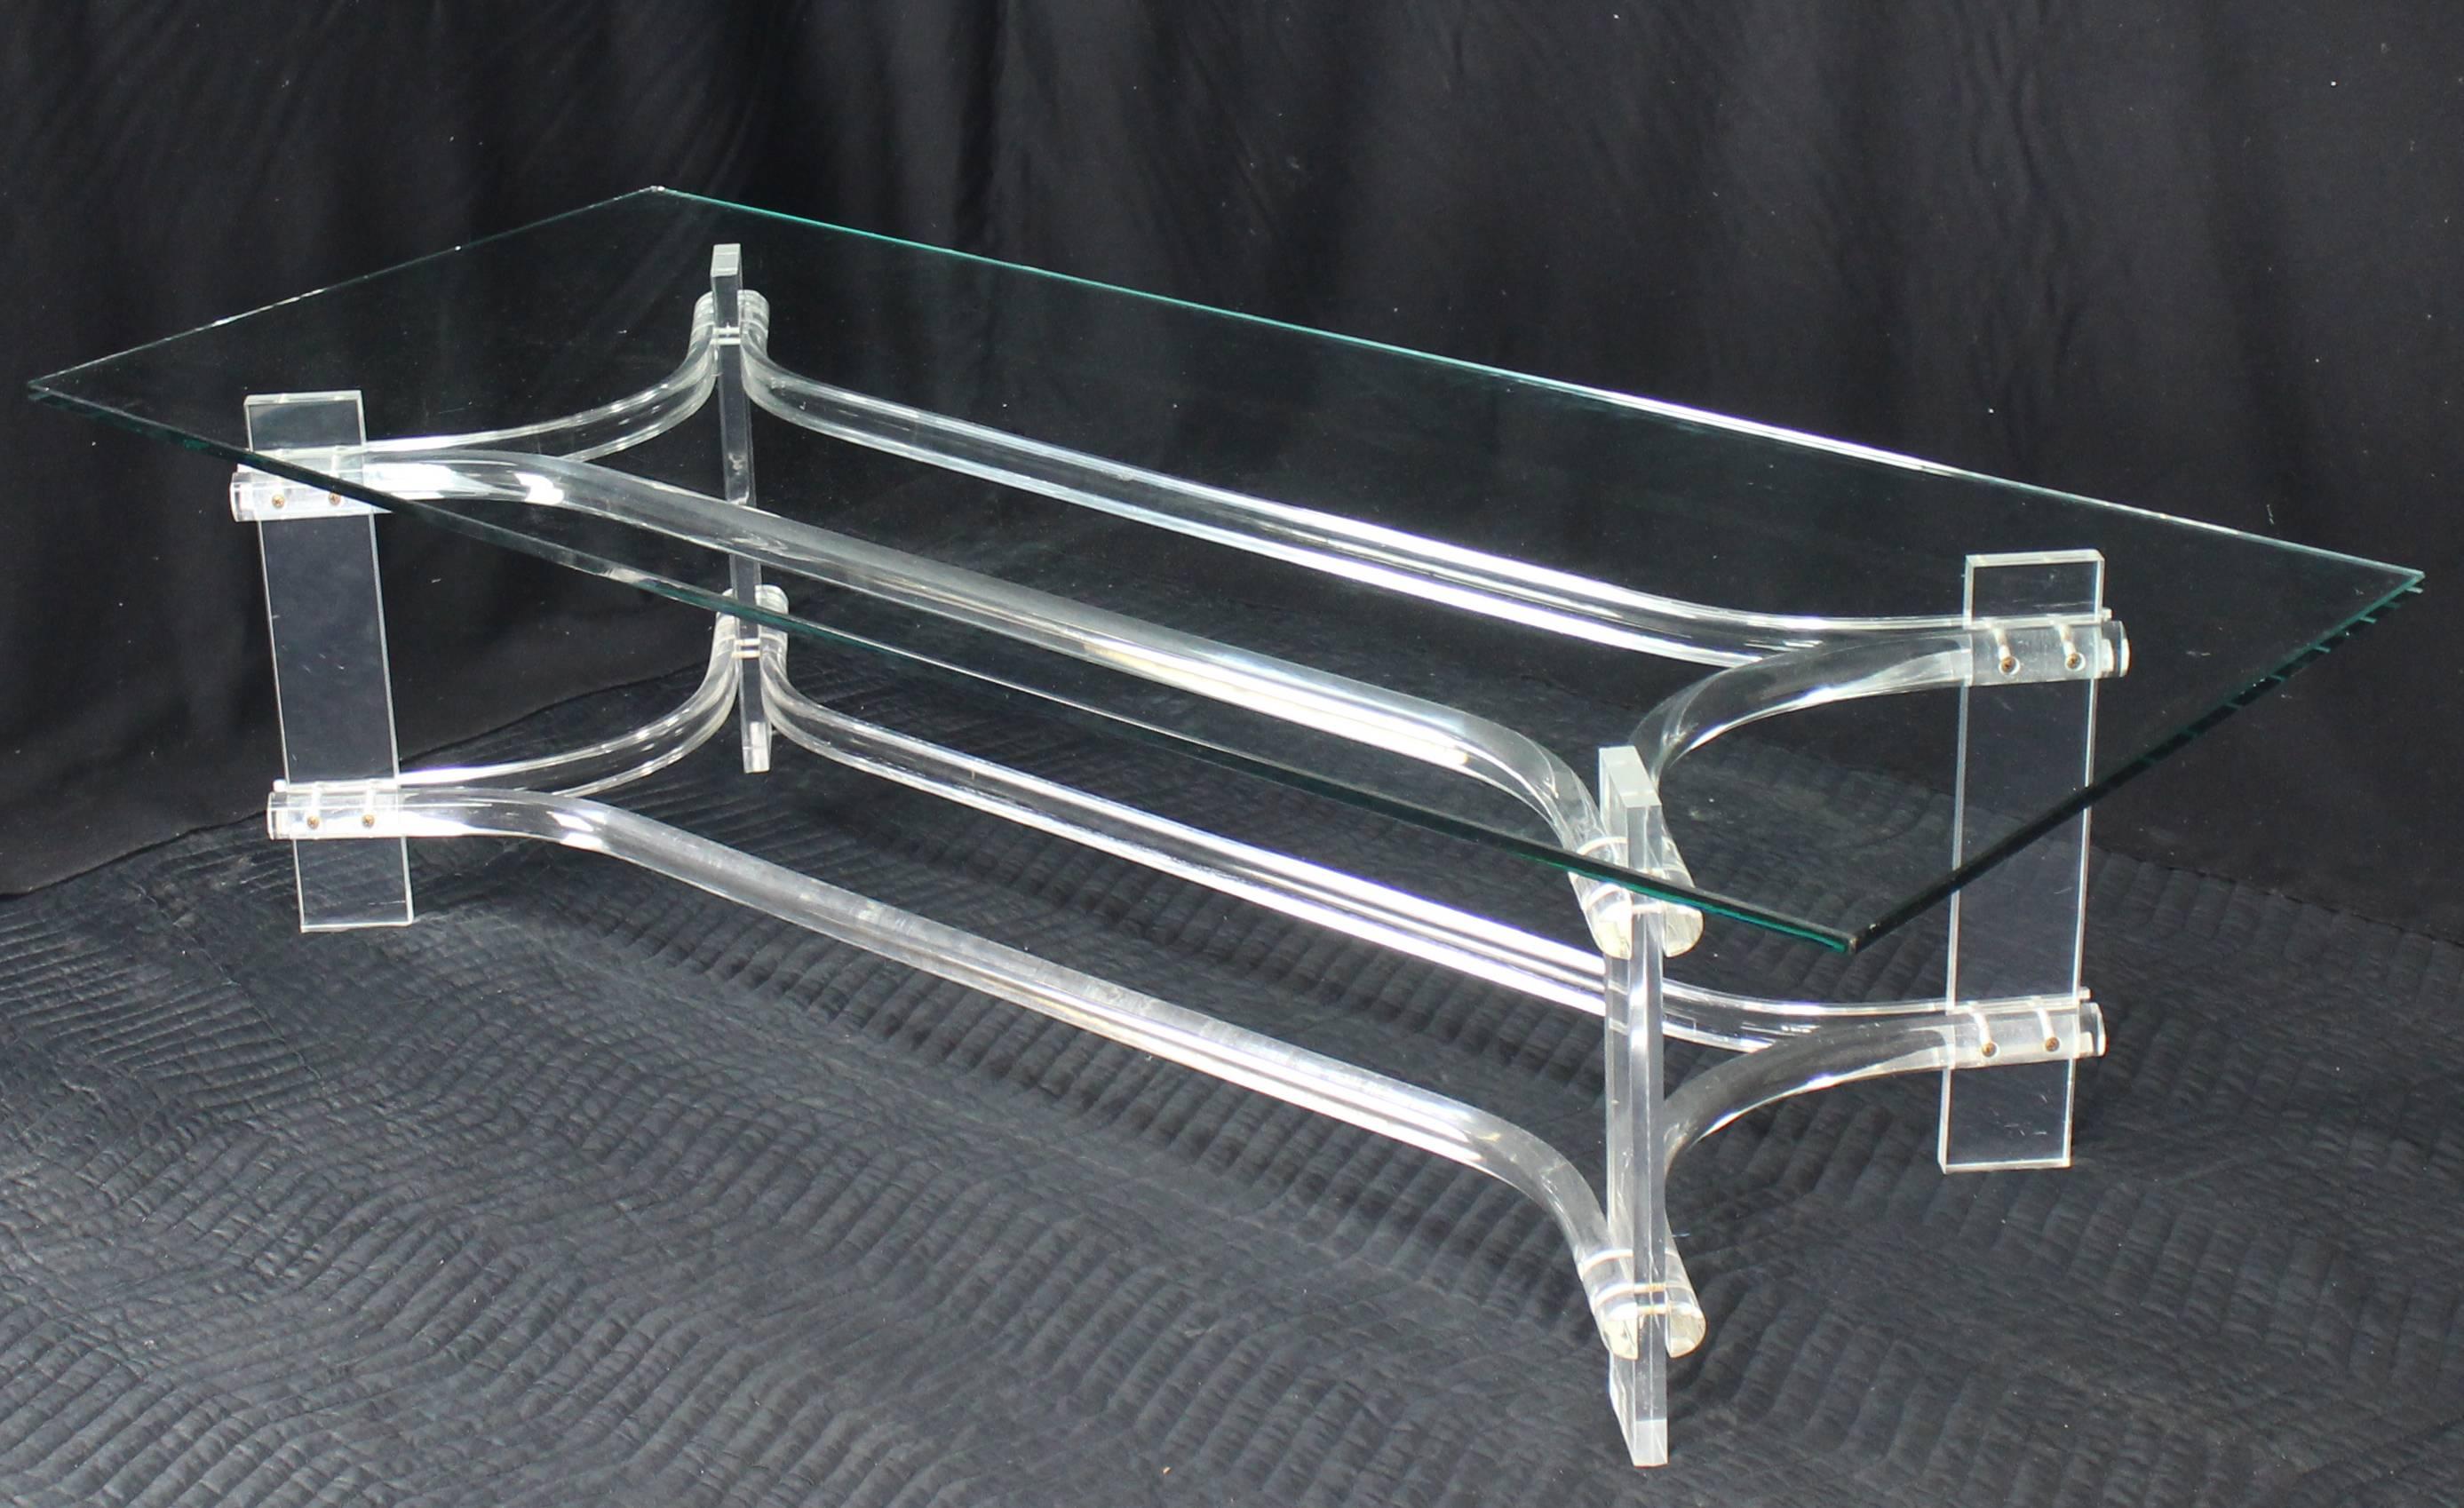 Sharp Mid-Century Modern bent Lucite glass top coffee table.